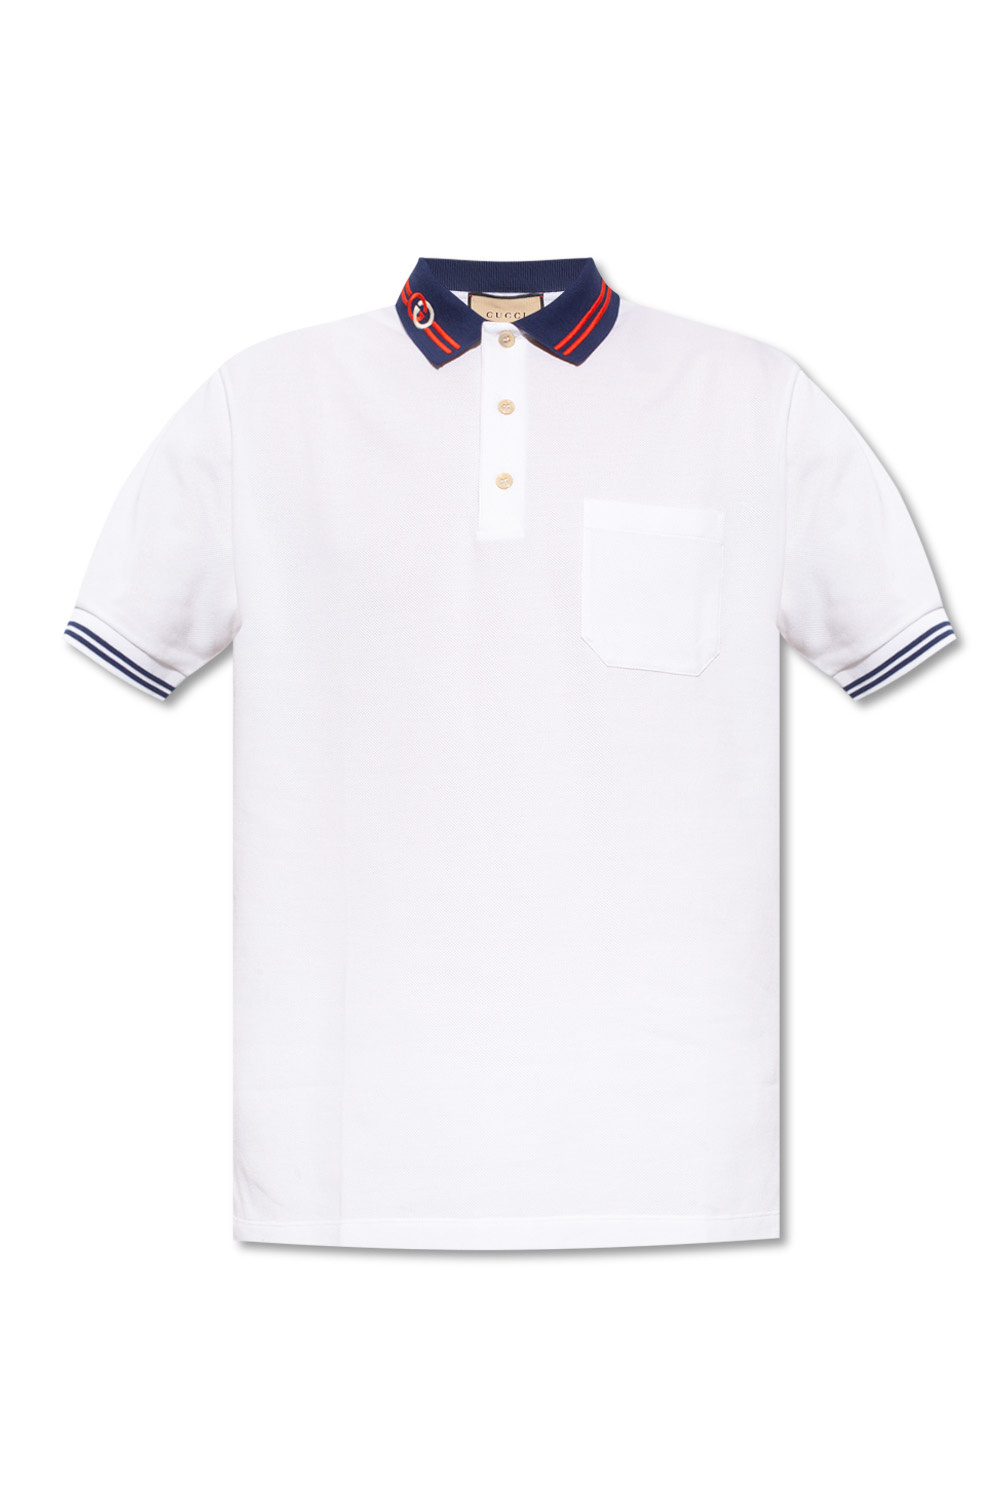 Cheap White Gucci Polo Shirt, Gucci Logo Shirt, Gifts For Dad That Has  Everything - Rosesy